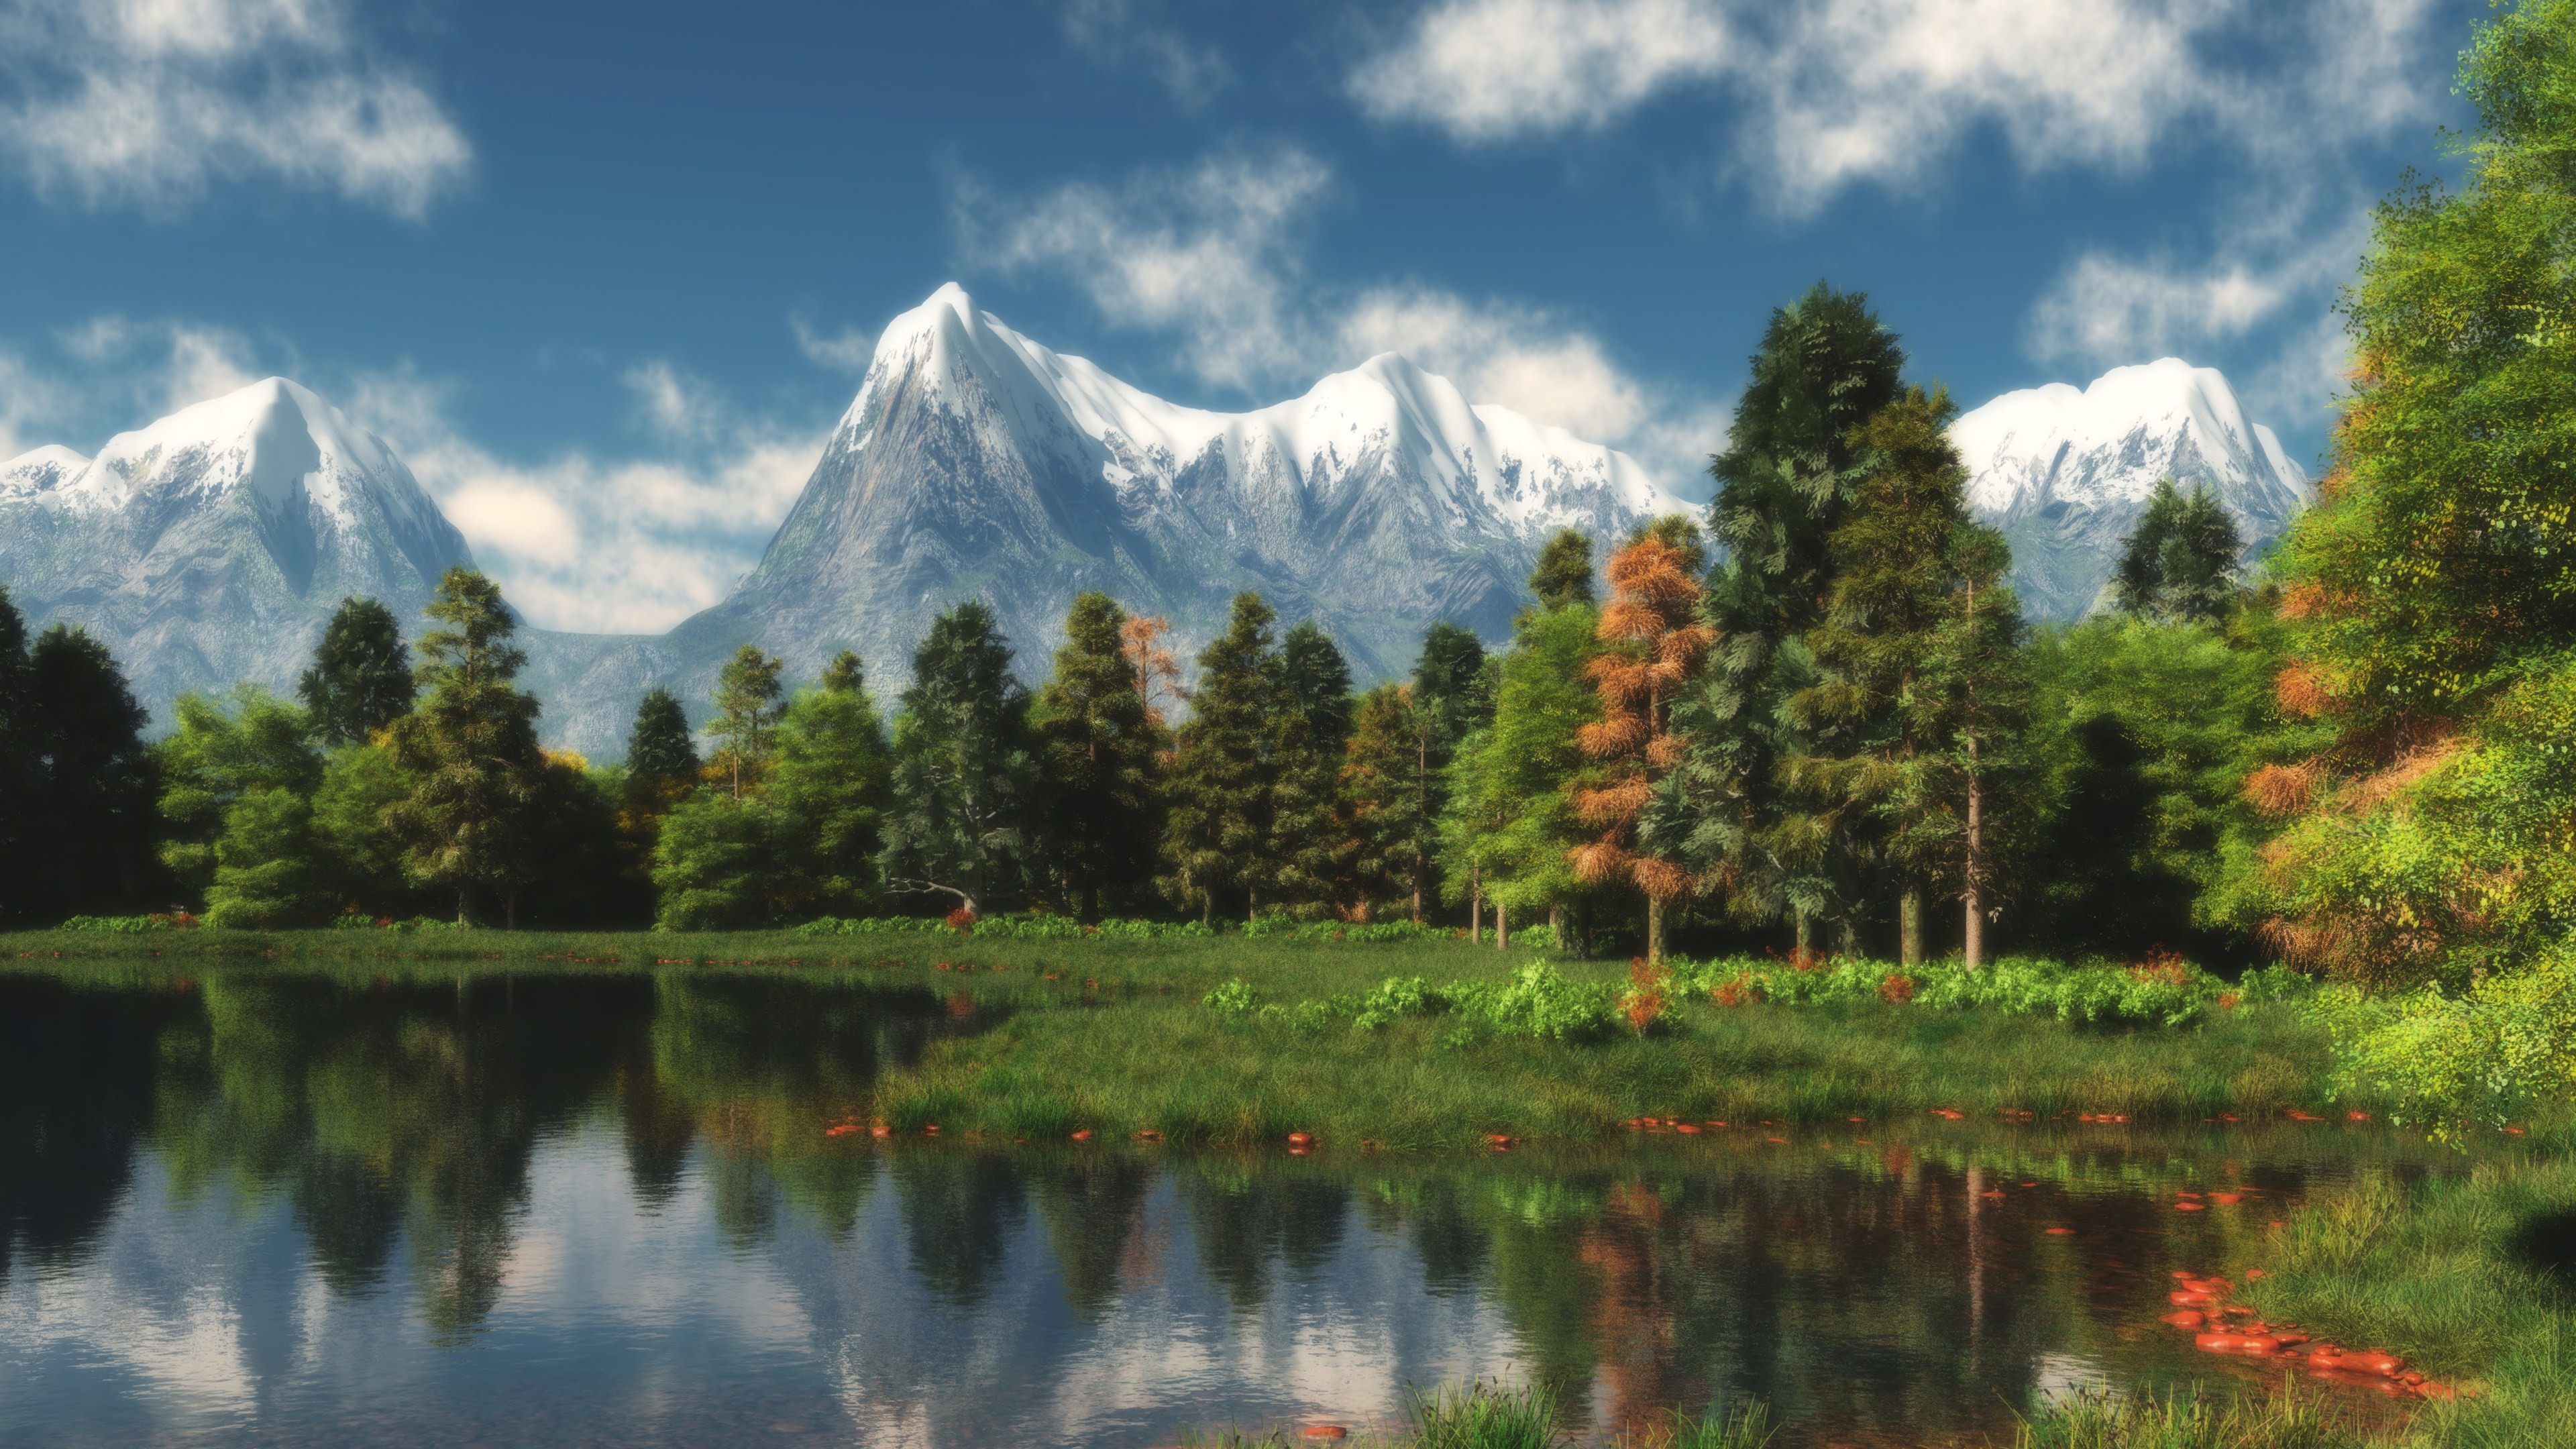 General 3840x2160 nature landscape trees forest mountains lake reflection clouds CGI